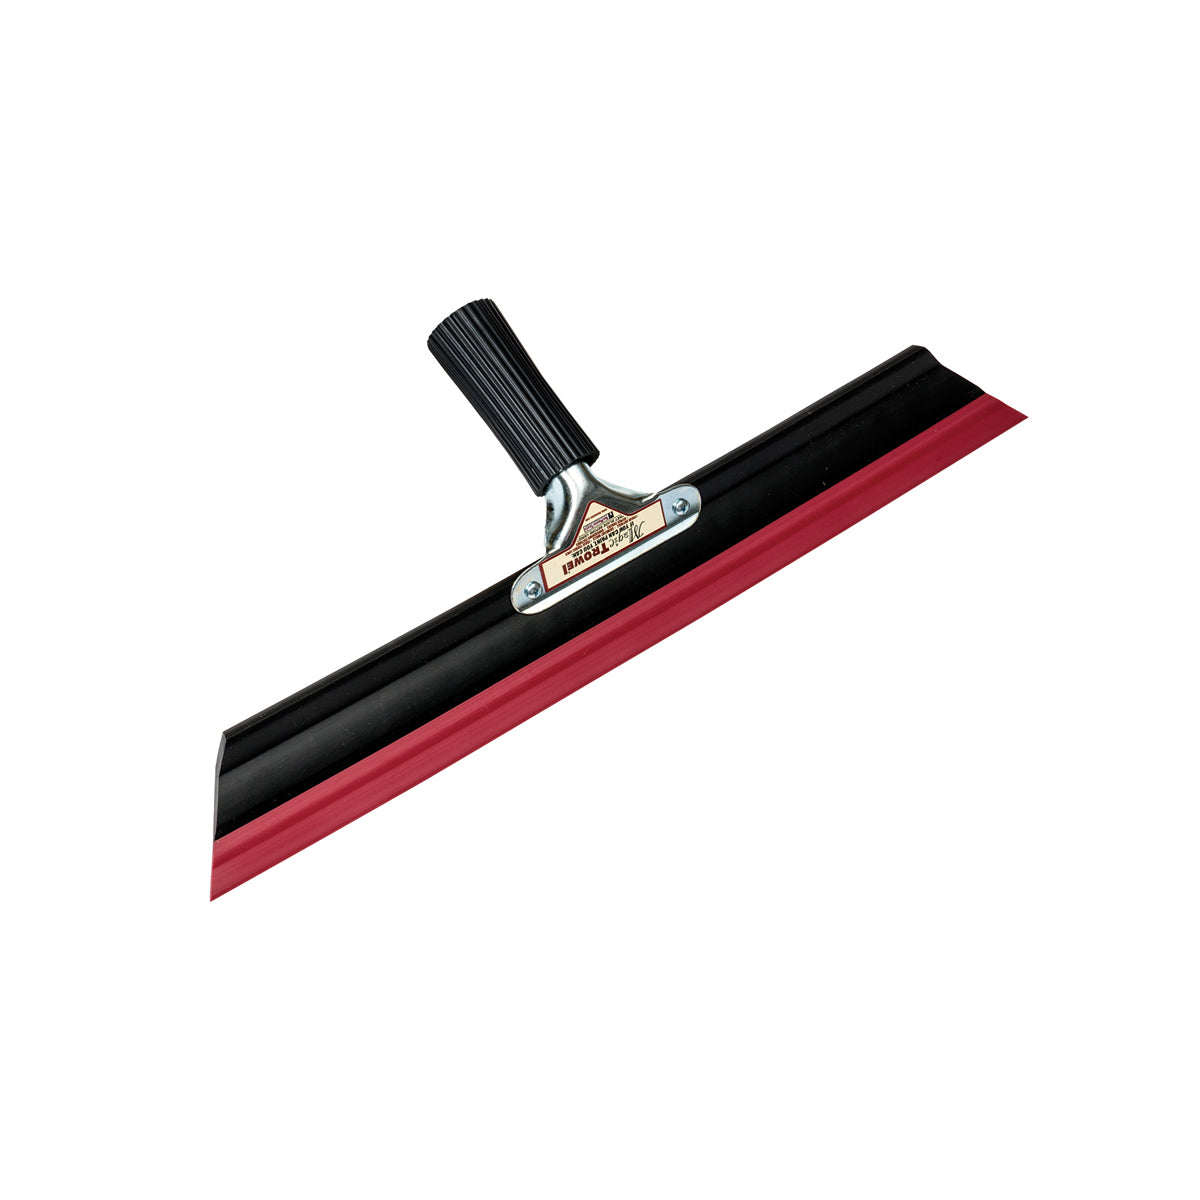 36 Notched Squeegee for Concrete Resurfacing